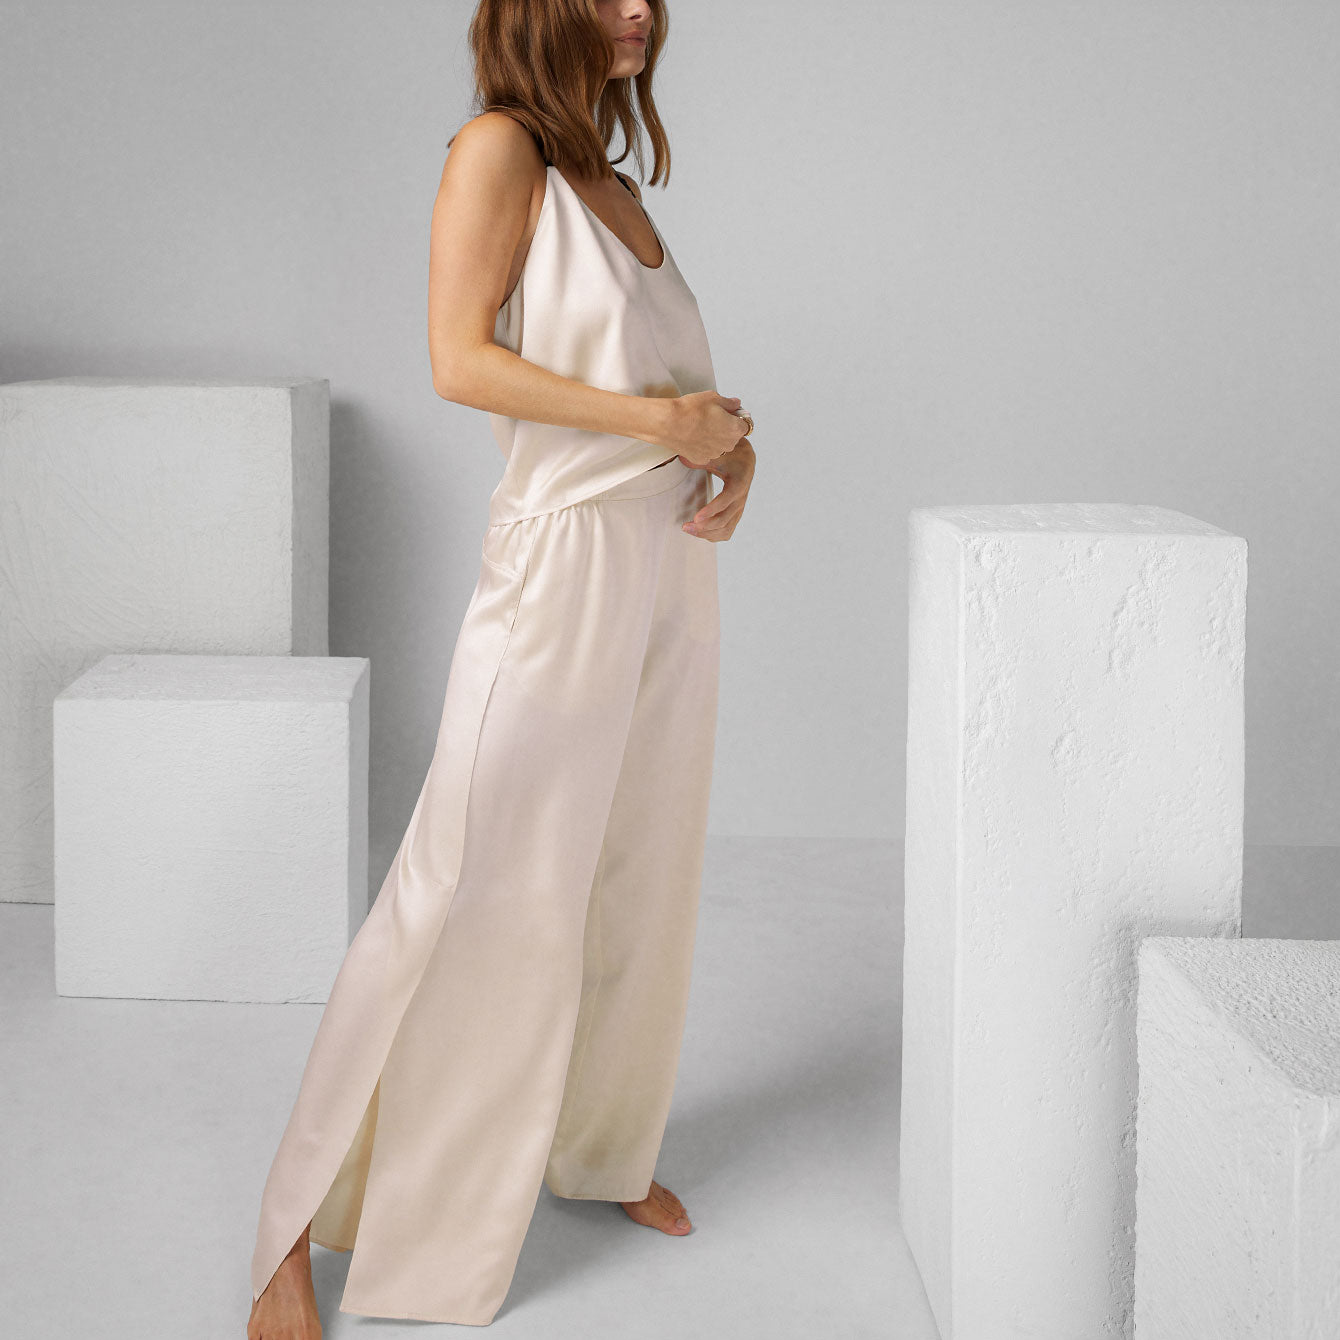 Washable Silk Cami Pant Set - #Swan White/Immersed Black